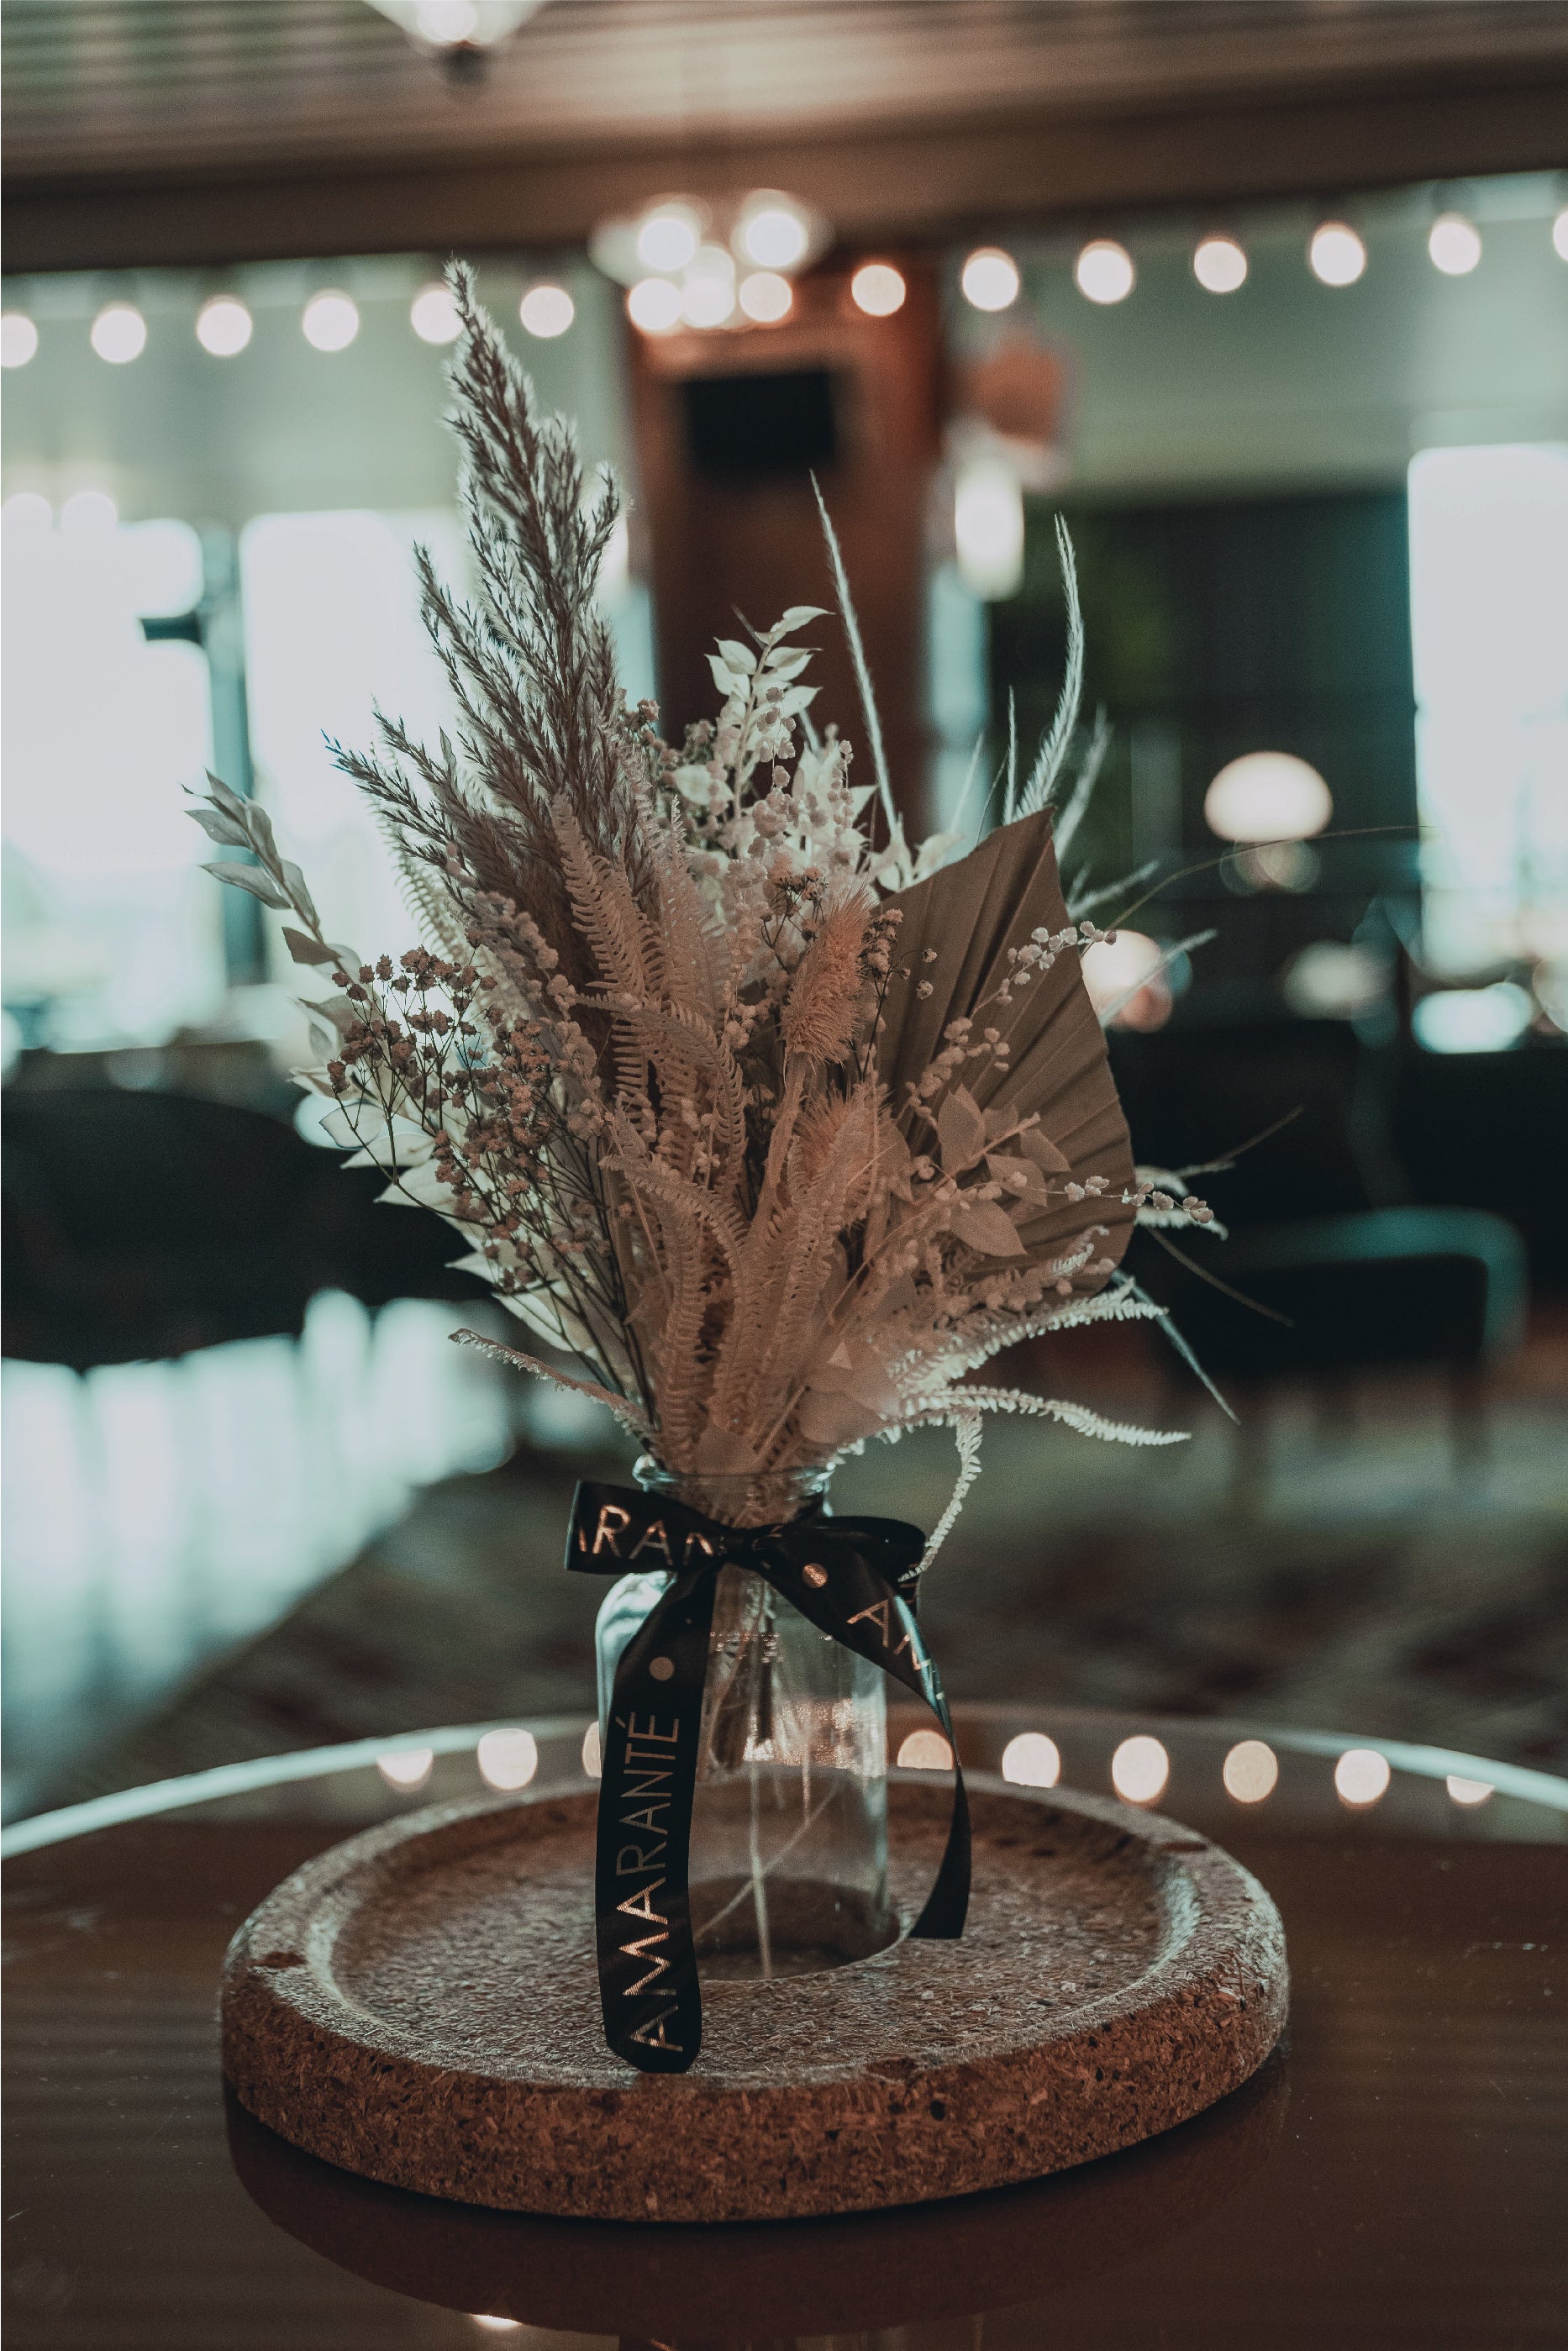 An Amaranté designed bespoke floral arrangement is showcased in this image, with an ethereal collection of white and pale green foliage accented by darker leaves, elegantly tied with a black ribbon around the glass vase, set upon a cork base with a softly lit, upscale lounge atmosphere in the background.